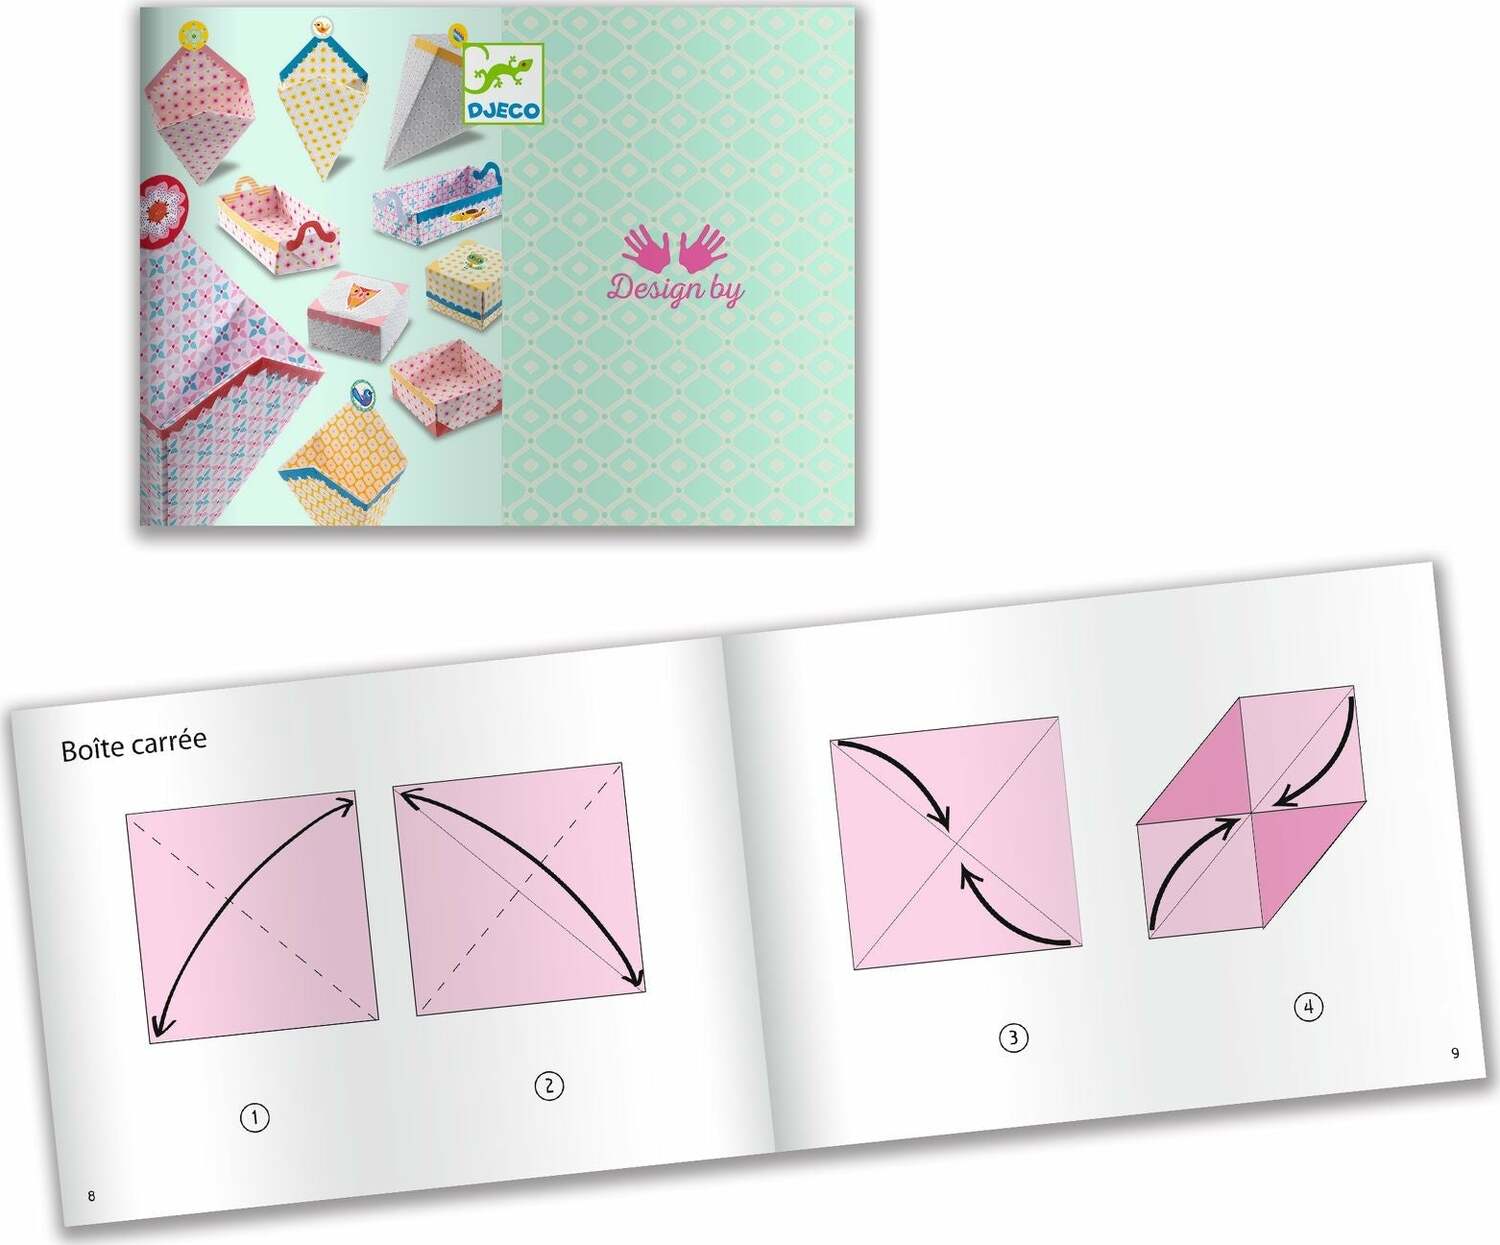 Small Boxes Origami Paper Craft Kit